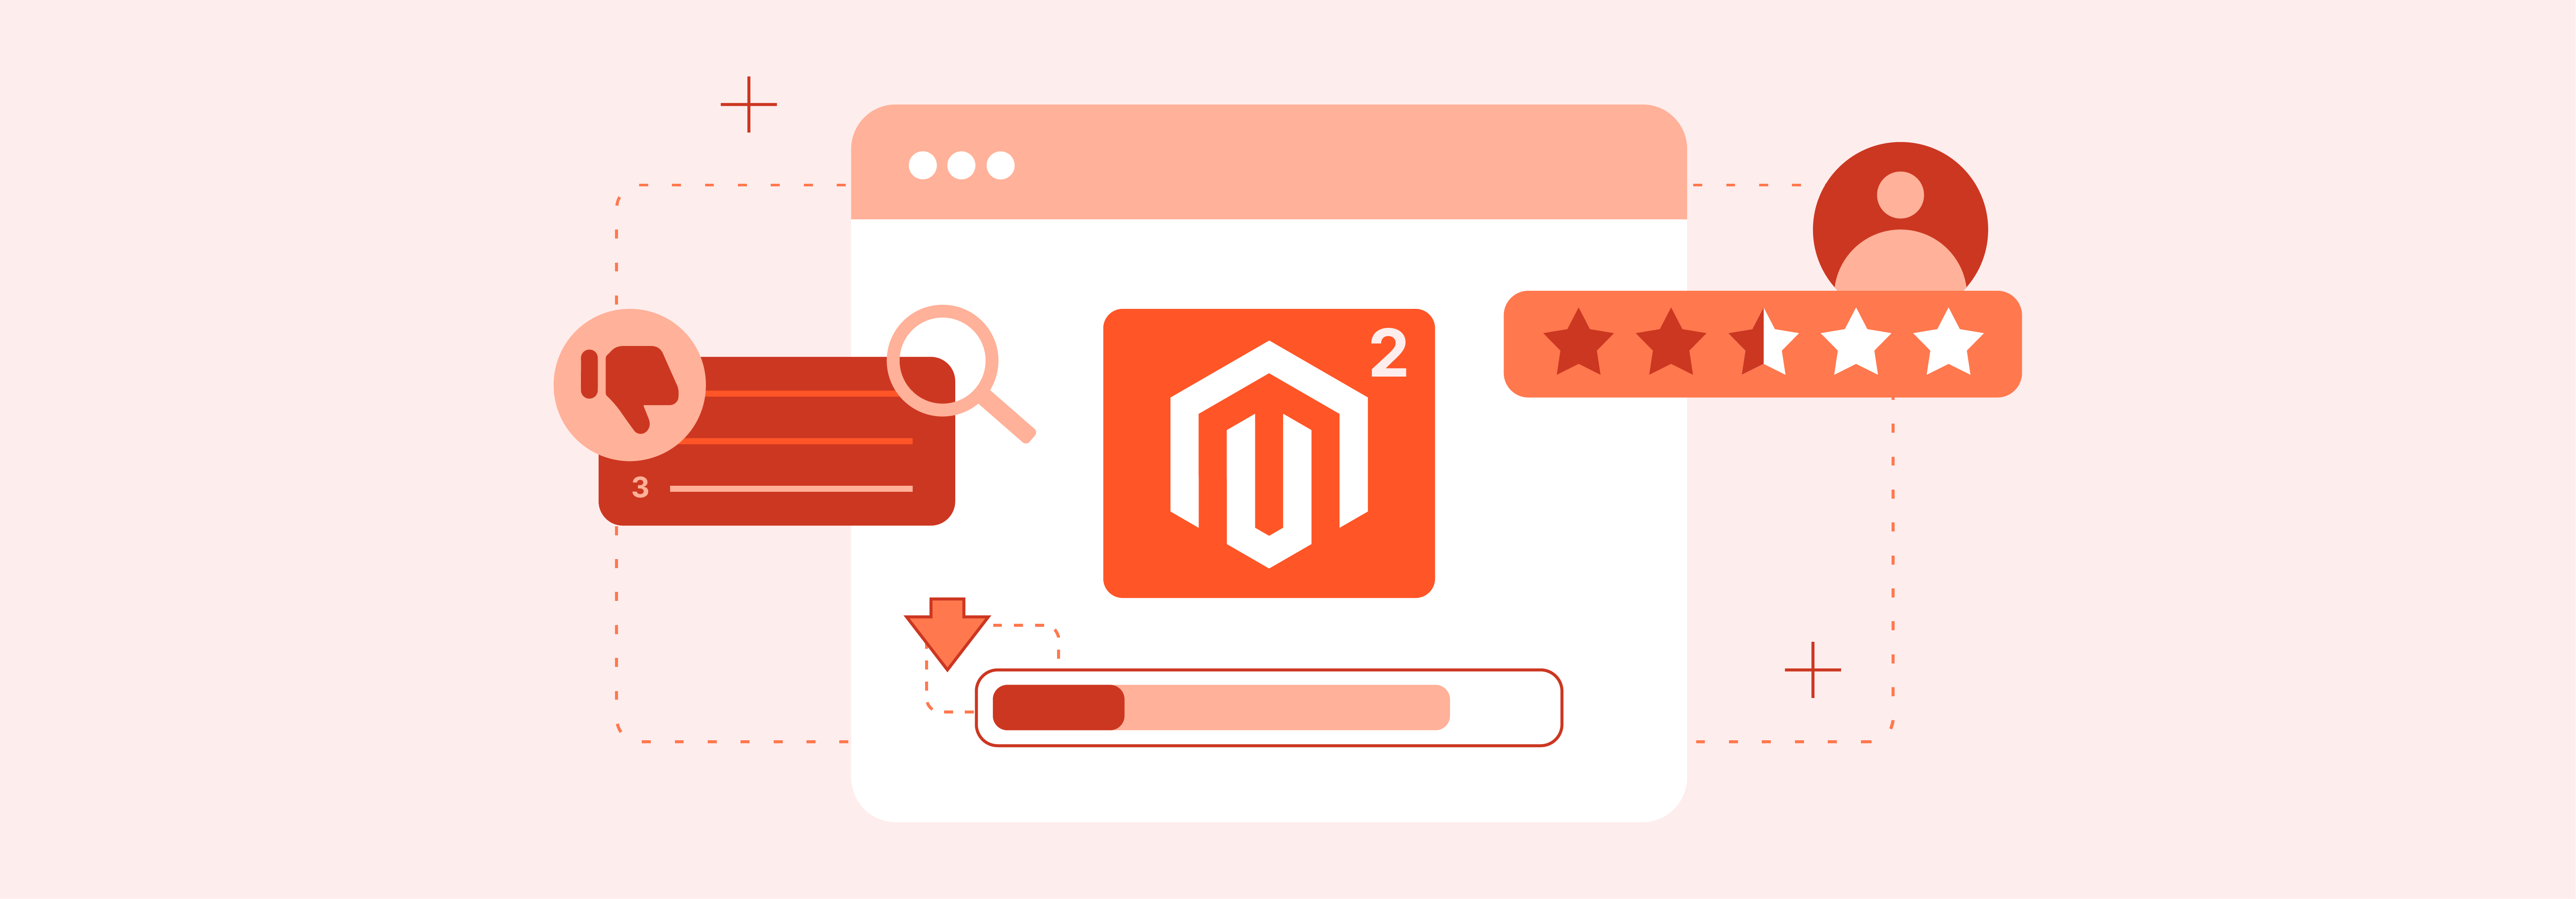 Common challenges faced by ecommerce businesses with slow Magento 2 hosting